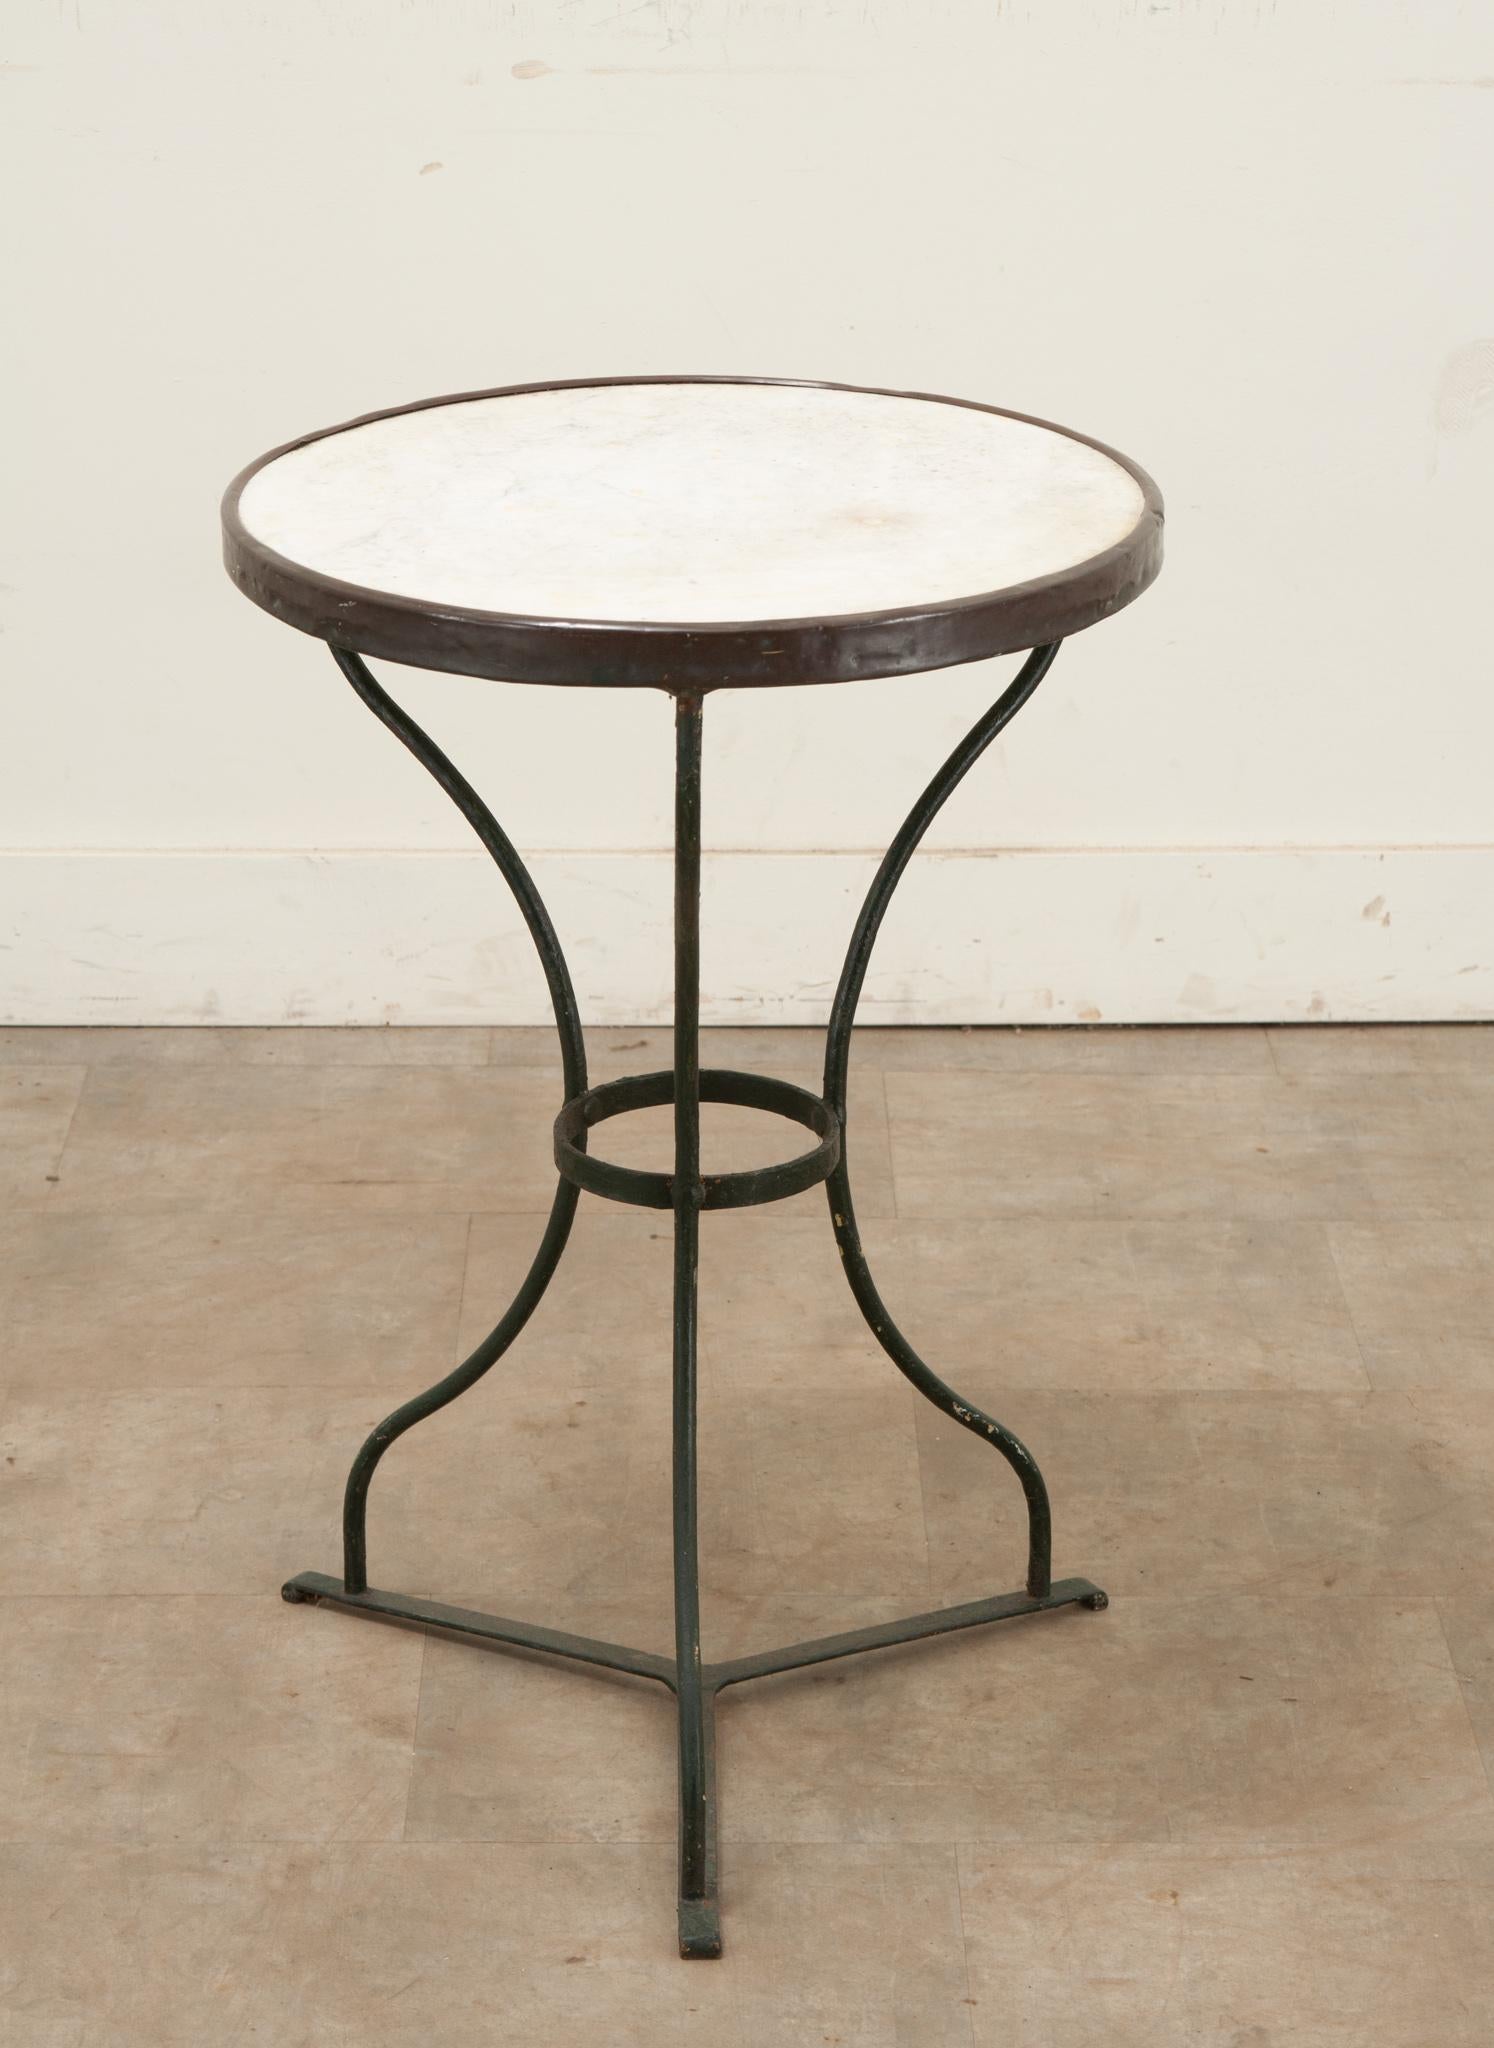 A classic Parisian style marble top & iron bistro table. The white marble top is surrounded by a tarnished brass band over three iron splayed legs. The patina and wear are consistent with age, be sure to view all the detailed images to see the